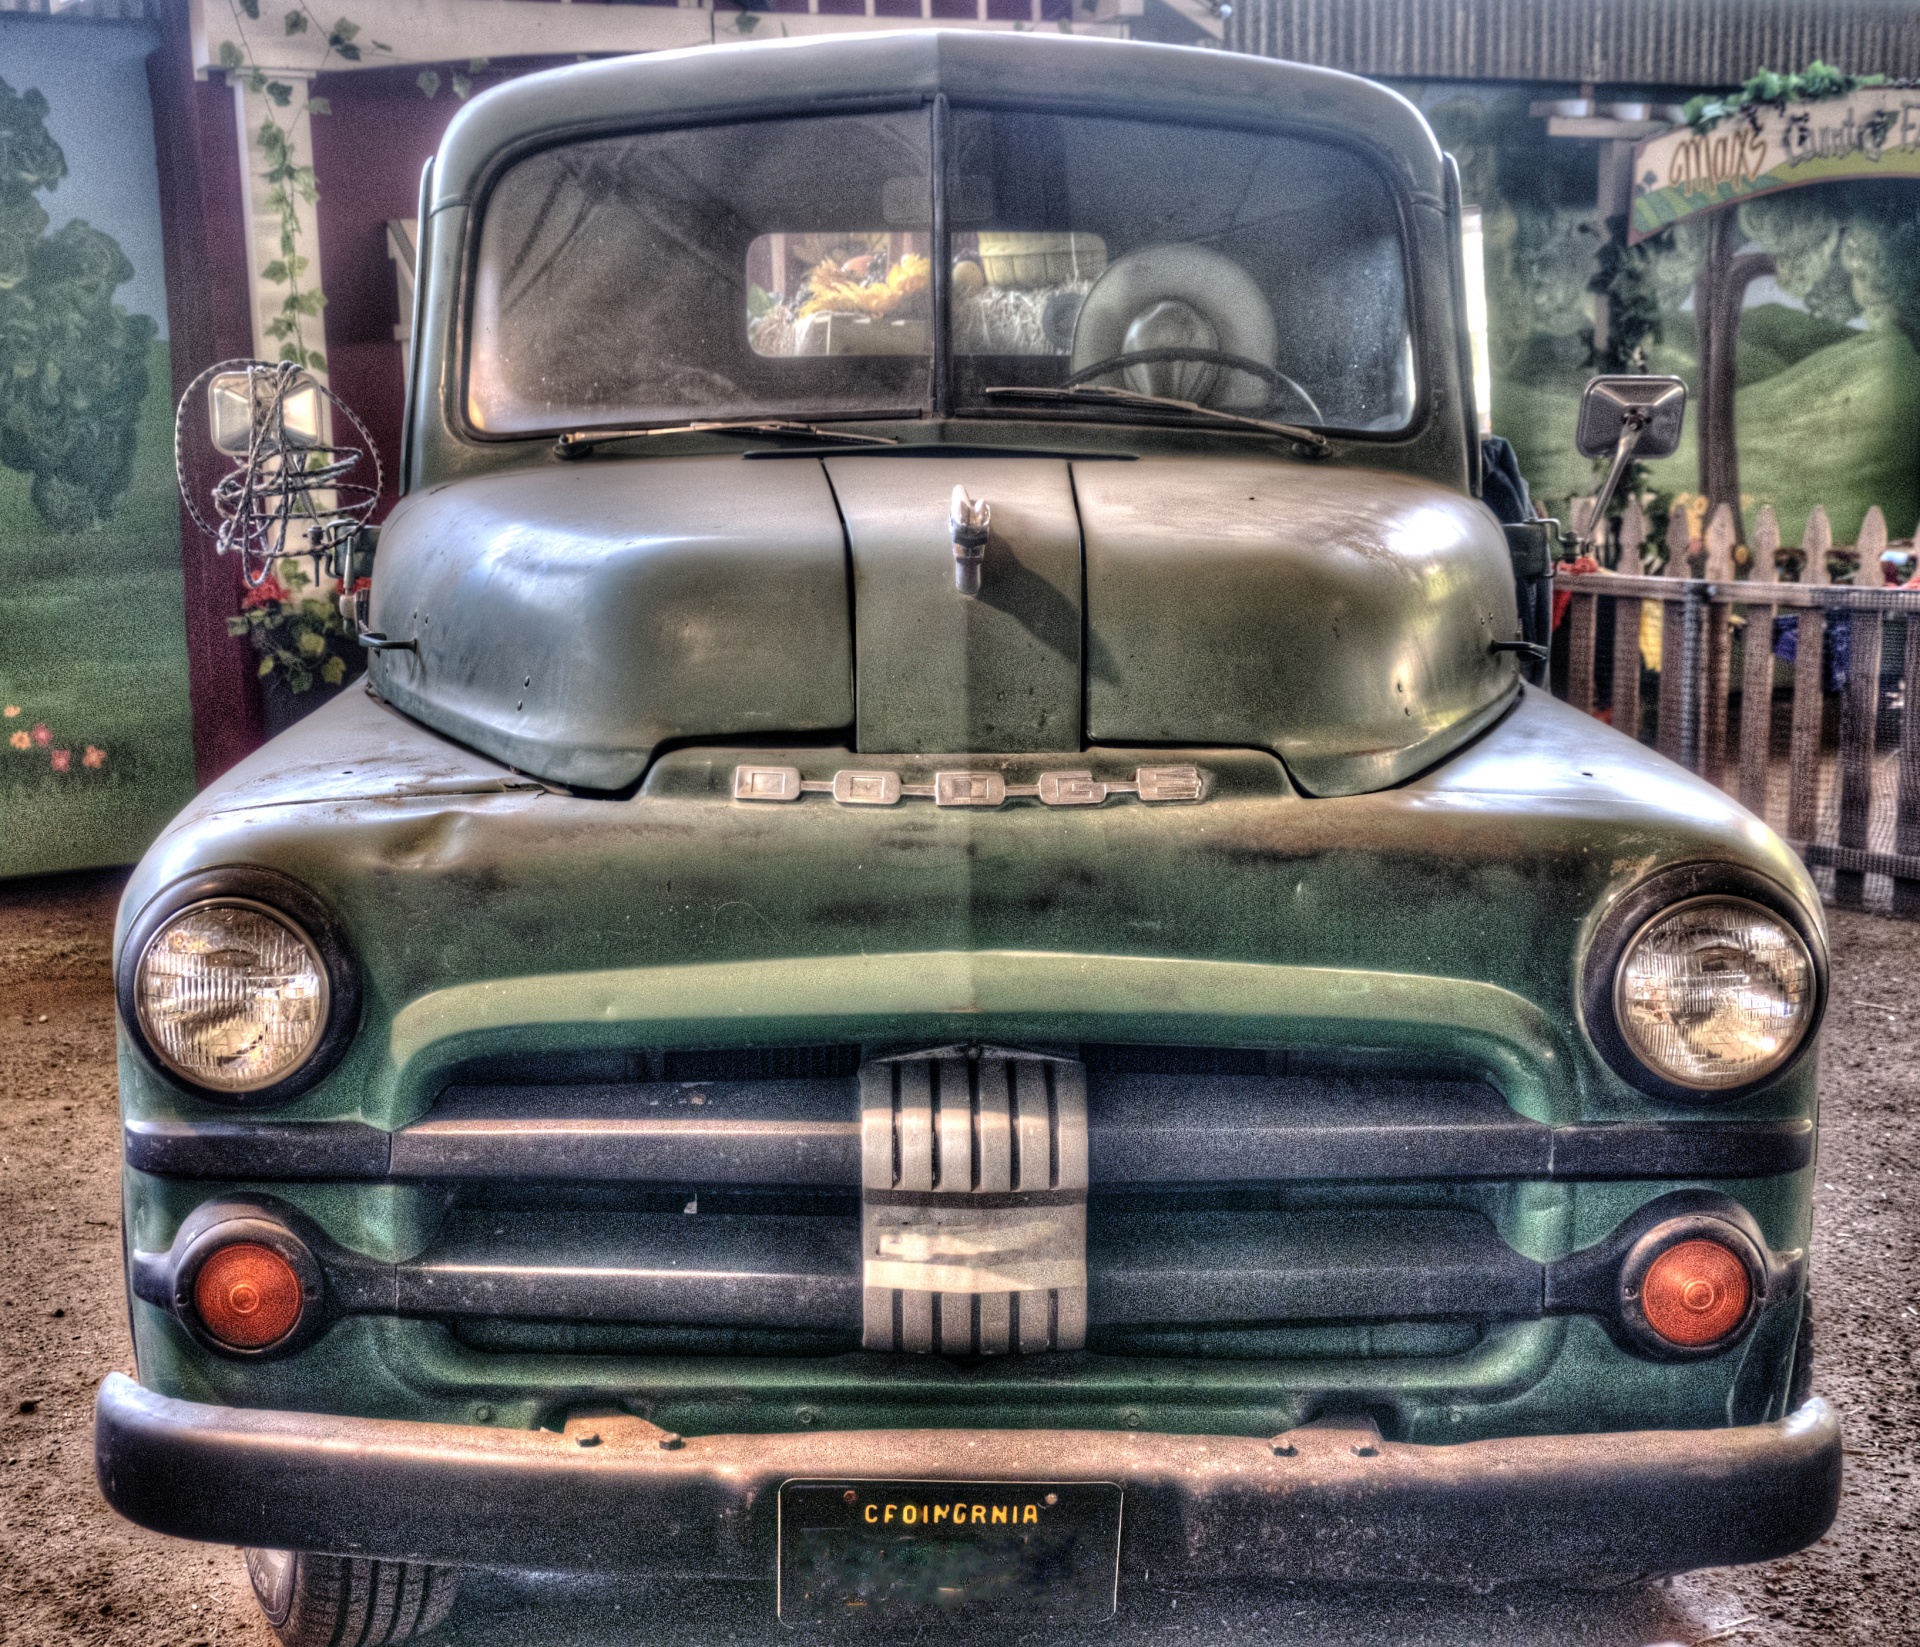 front view of old pick up truck - artistic touch applied